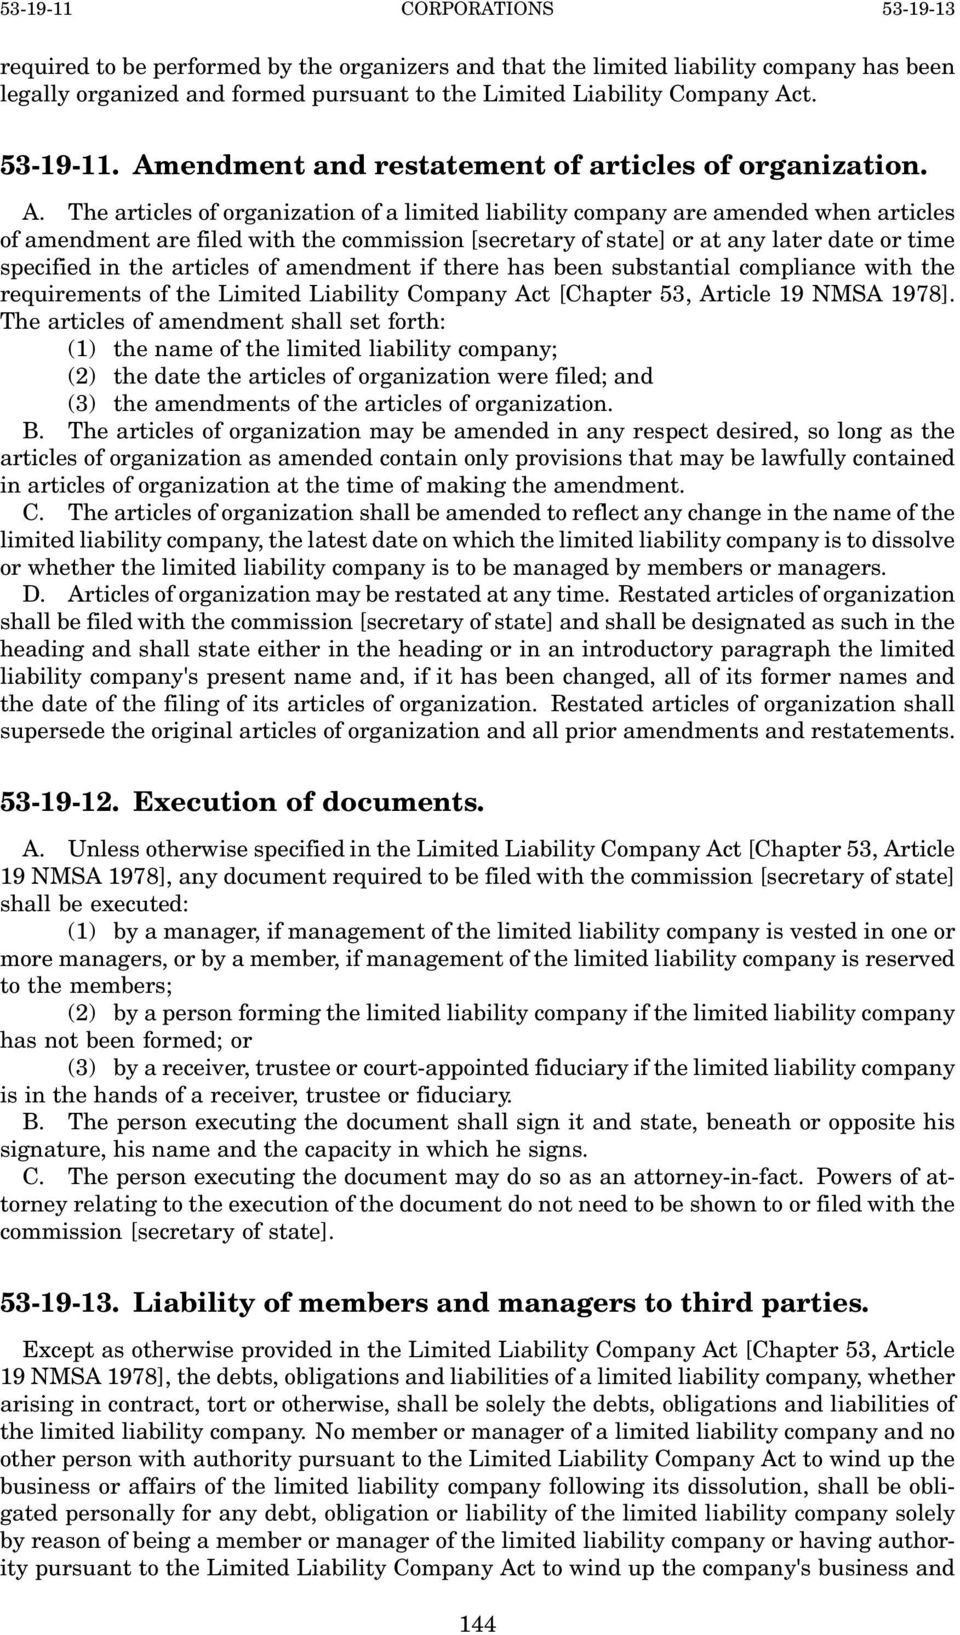 endment and restatement of articles of organization. A.